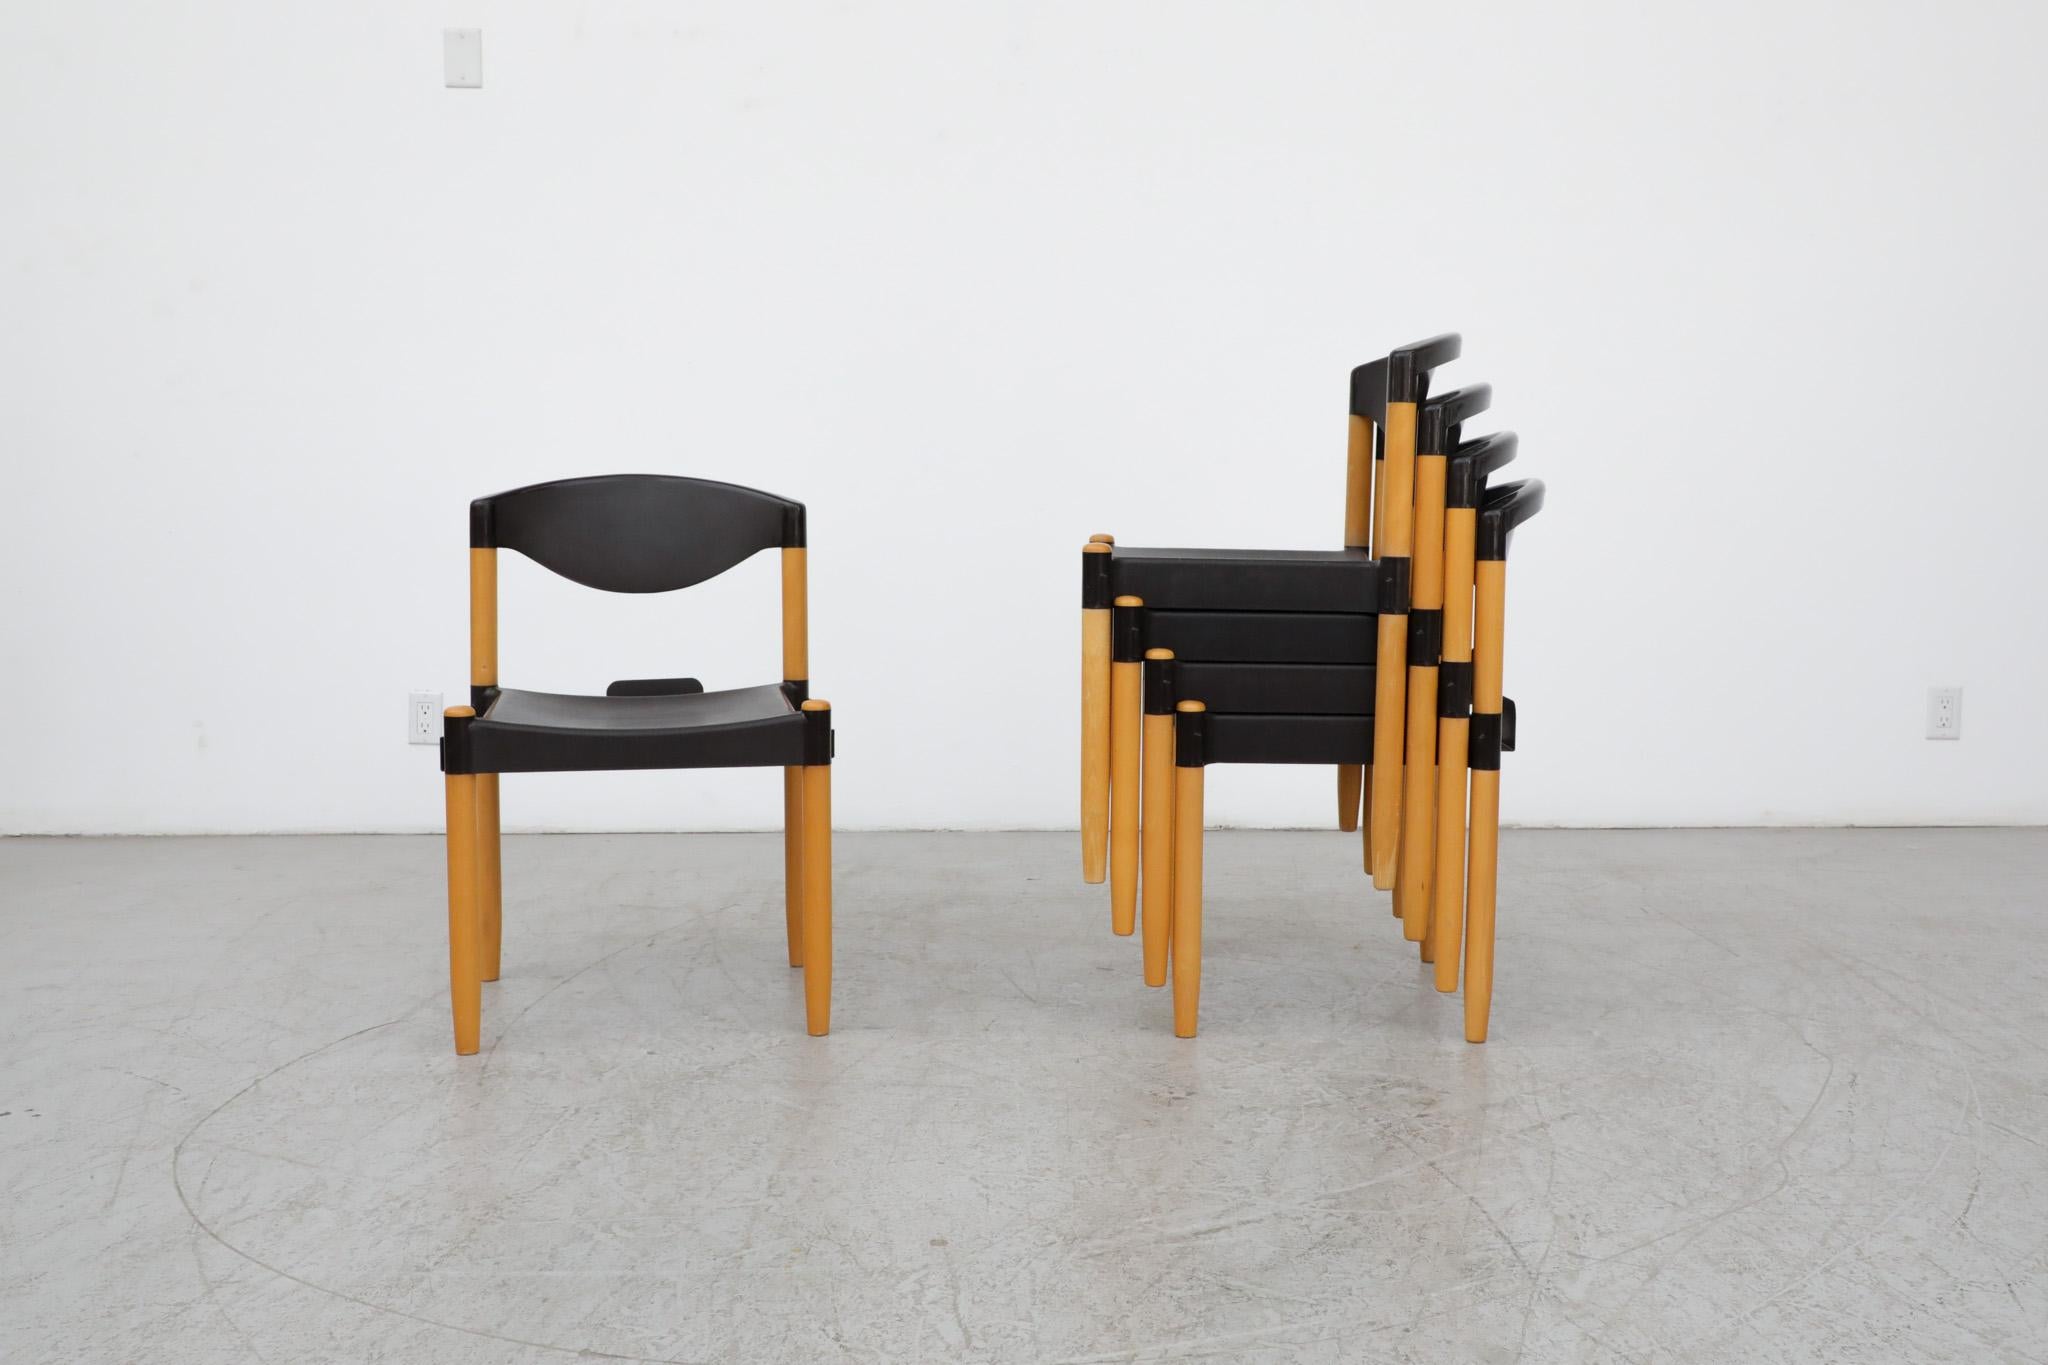 Mid-Century 'Strax' stacking chairs by Hartmut Lohmeyer for Casala, 1970s. Molded black plastic seat and back rest with tapered Birch legs designed to stack and interlock to make rows of seating. In original condition with visible wear and